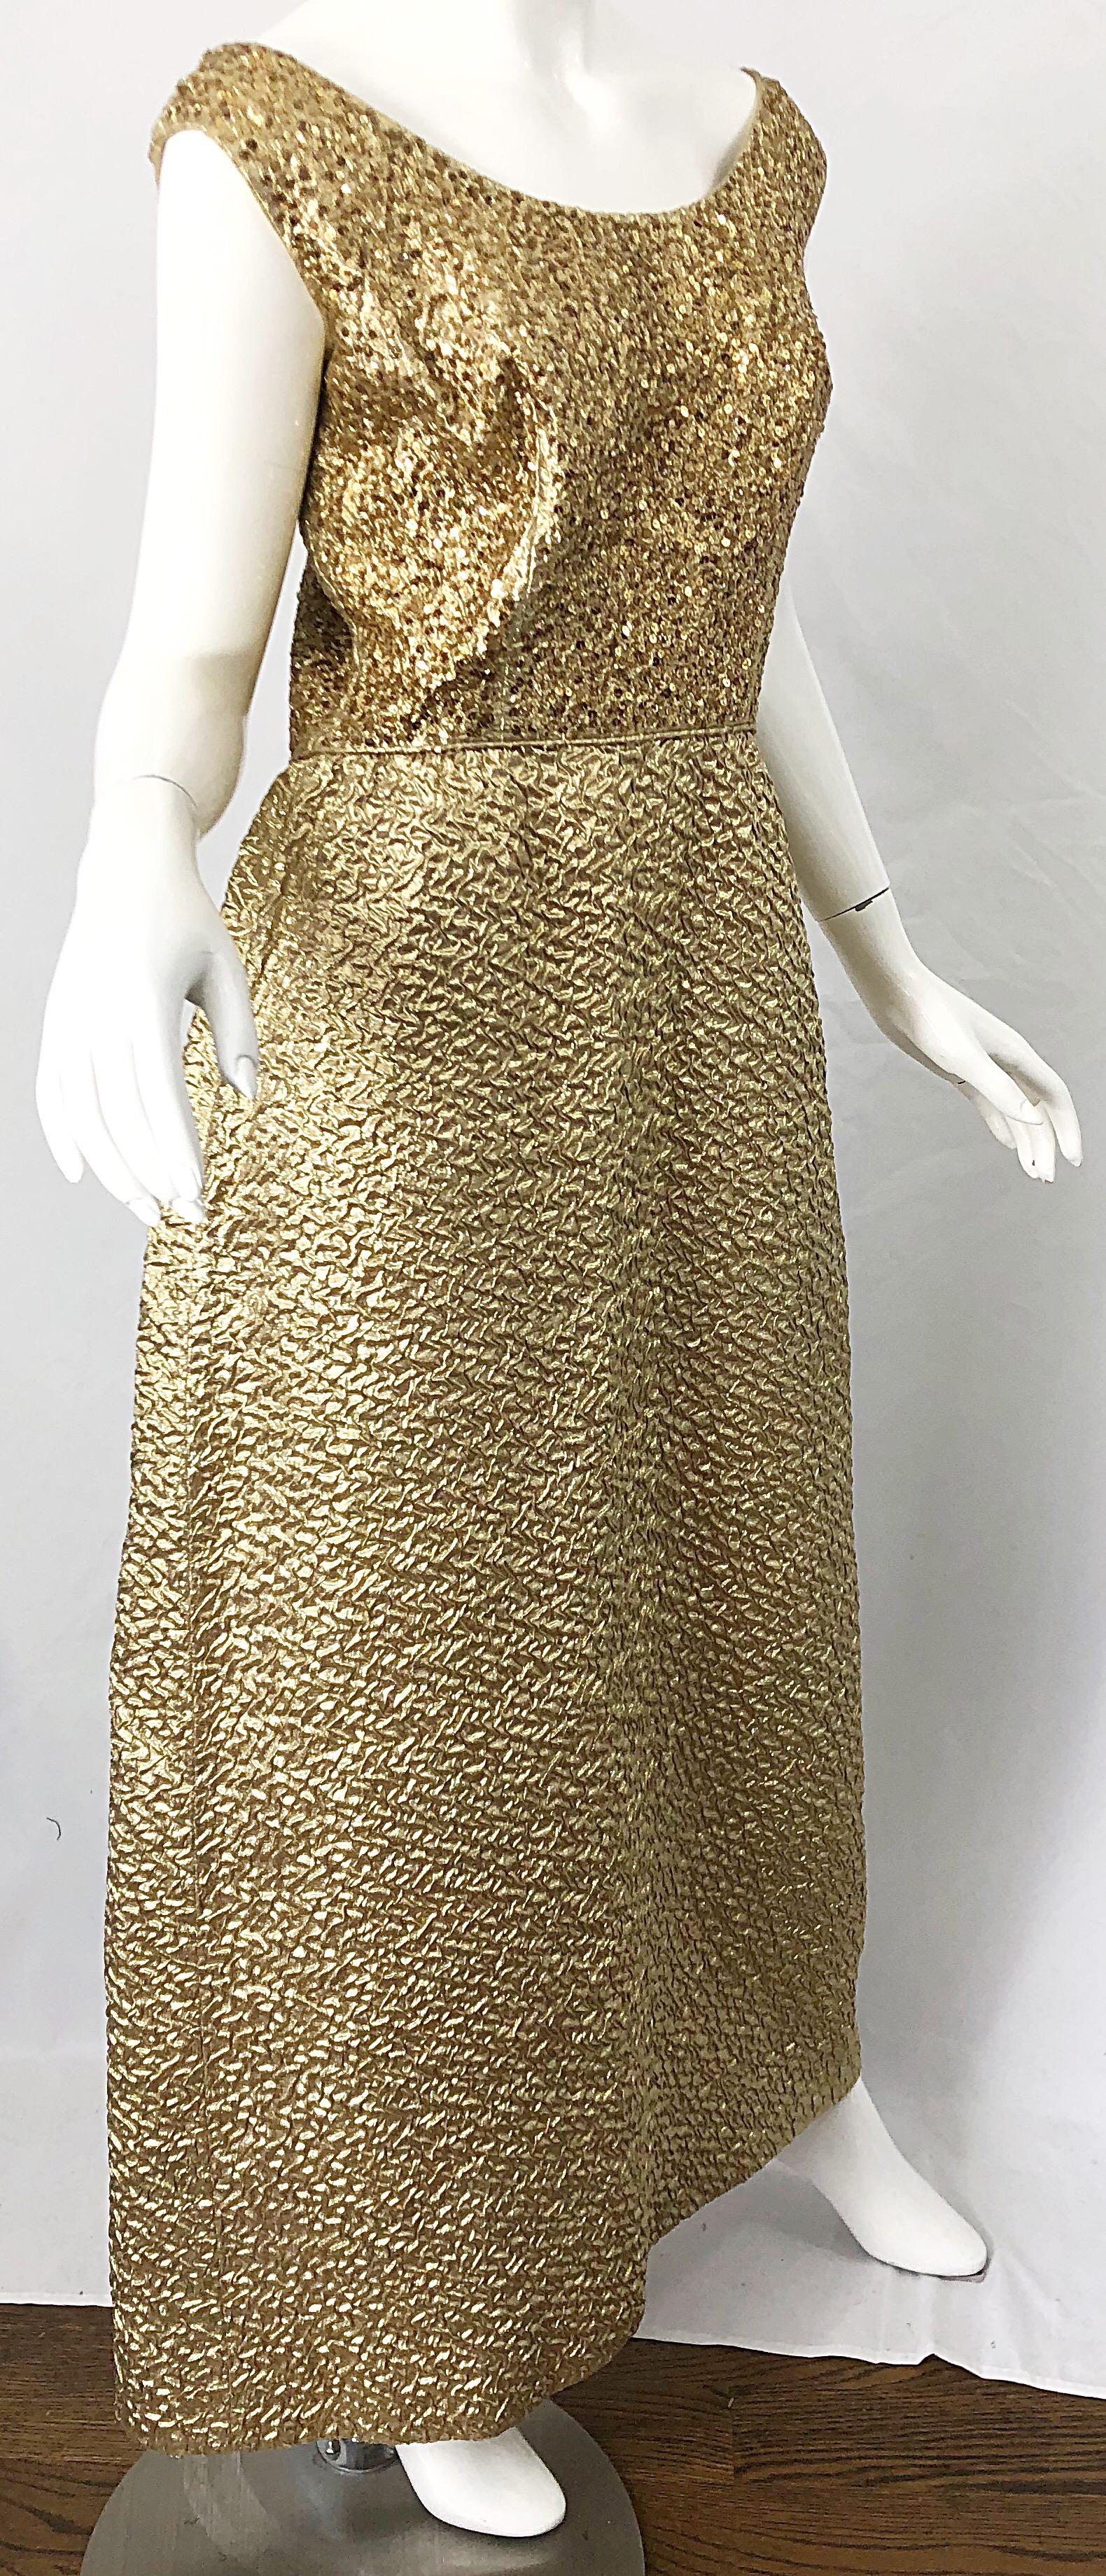 Women's 1960s Nat Kaplan Gold Sequin Rhinestone Encrusted Vintage 60s Evening Gown Dress For Sale